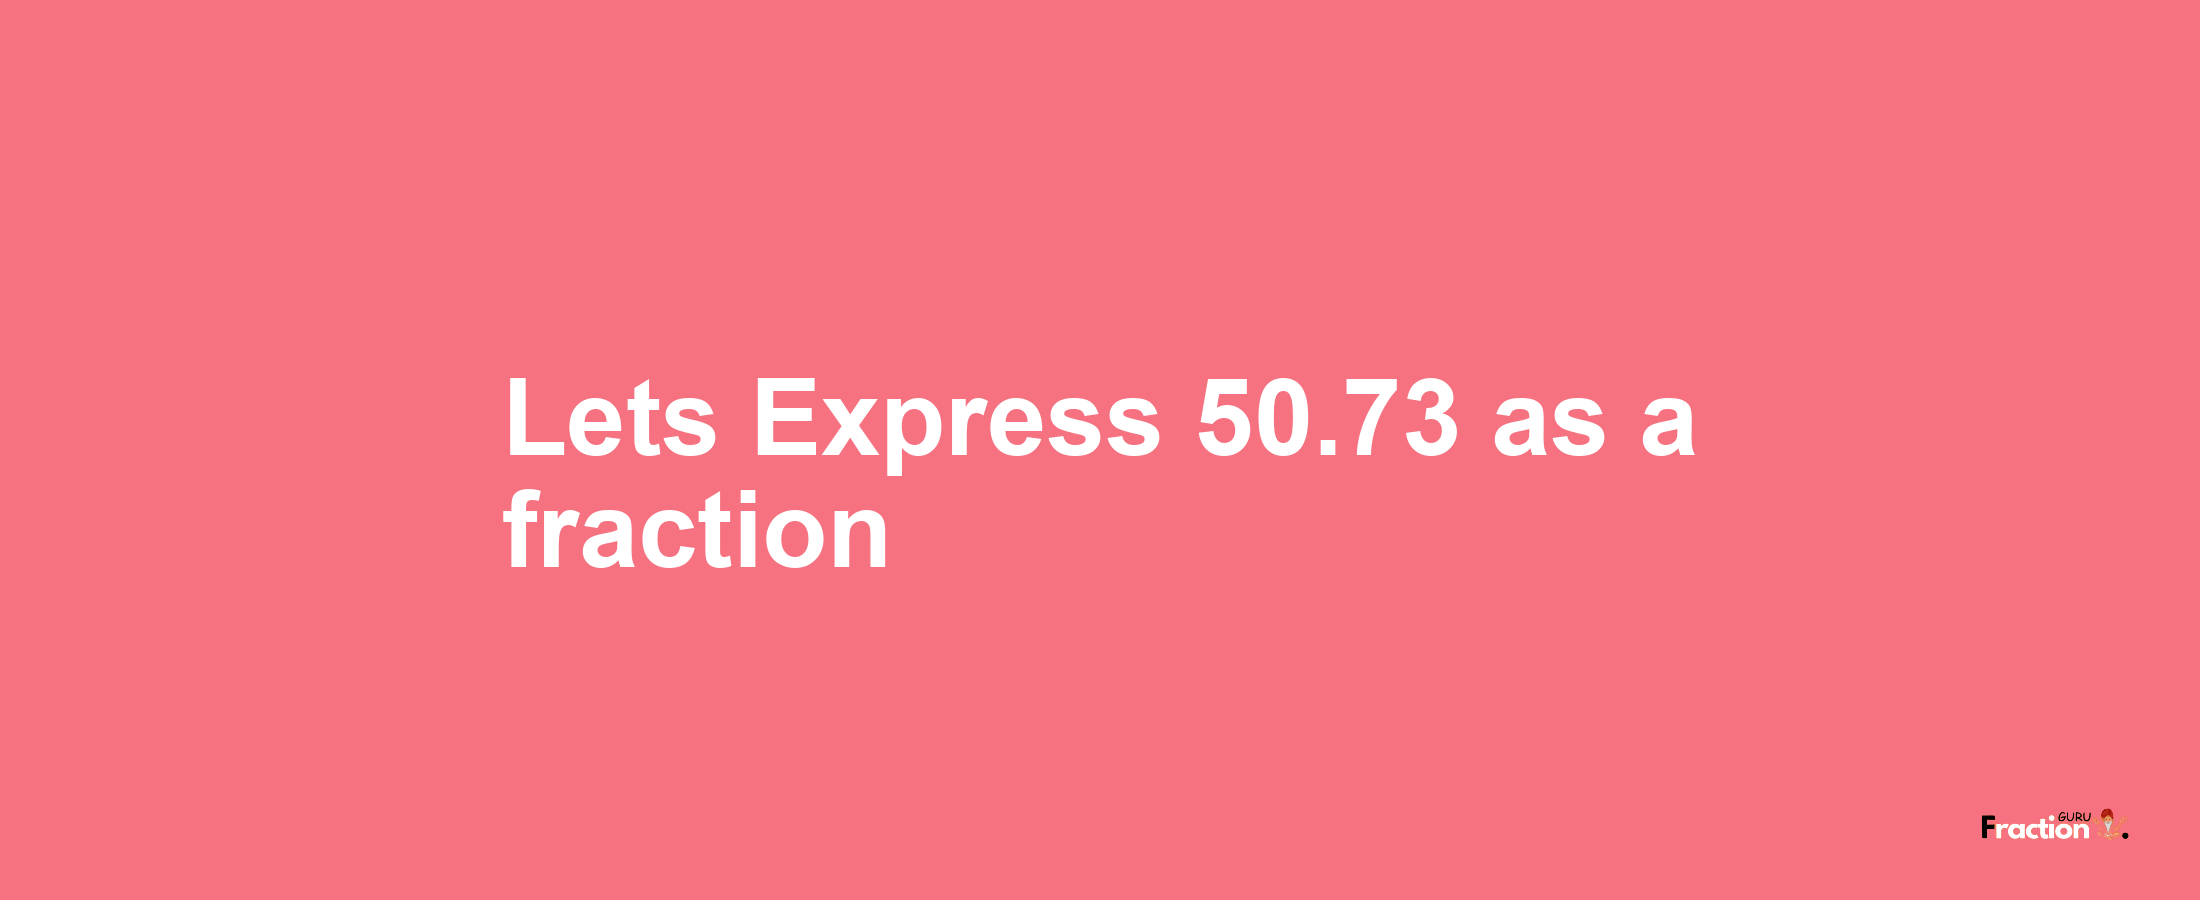 Lets Express 50.73 as afraction